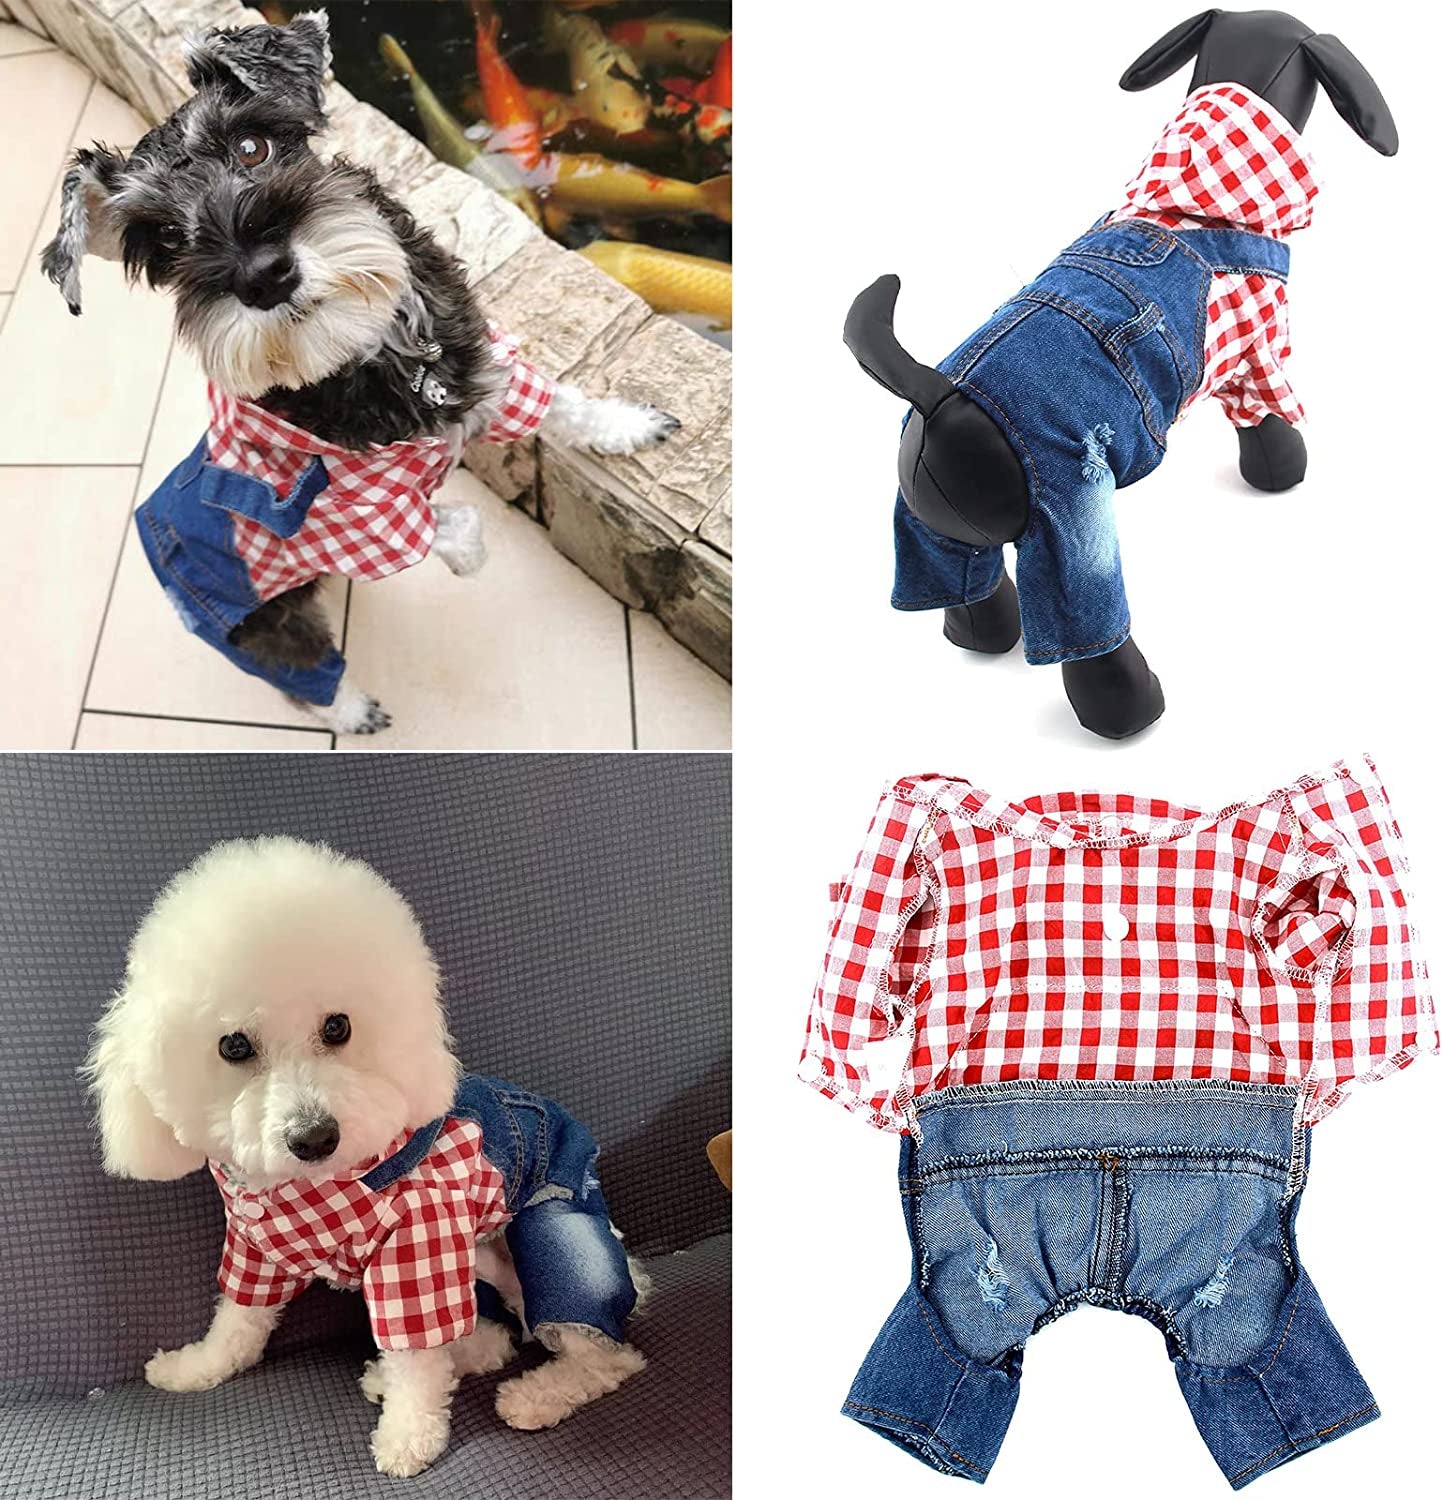 PETCARE Pet Dog Denim Jumpsuit Plaid Hoodies Puppy Overalls Doggy Jeans Jacket Clothes for Small Dogs Cats Chihuahua Yorkie Spring Summer Costume Outfit Animals & Pet Supplies > Pet Supplies > Dog Supplies > Dog Apparel Yi Wu Shi Jia Chong Dian Zi Shang Wu Shang Hang   